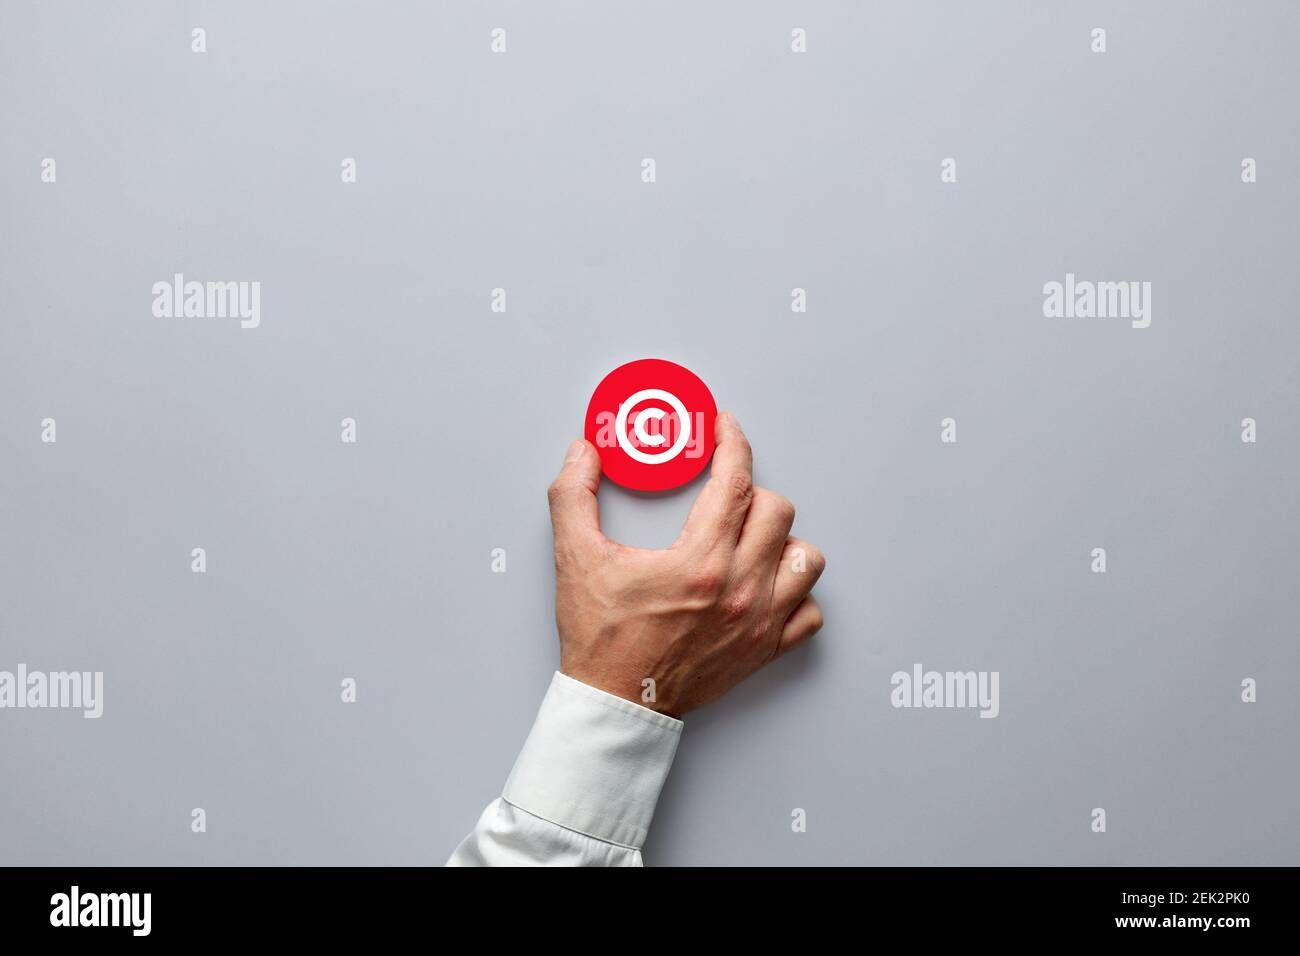 Businessman hand holding a red badge with copyright symbol. Property rights and brand patent protection in business concept. Stock Photo